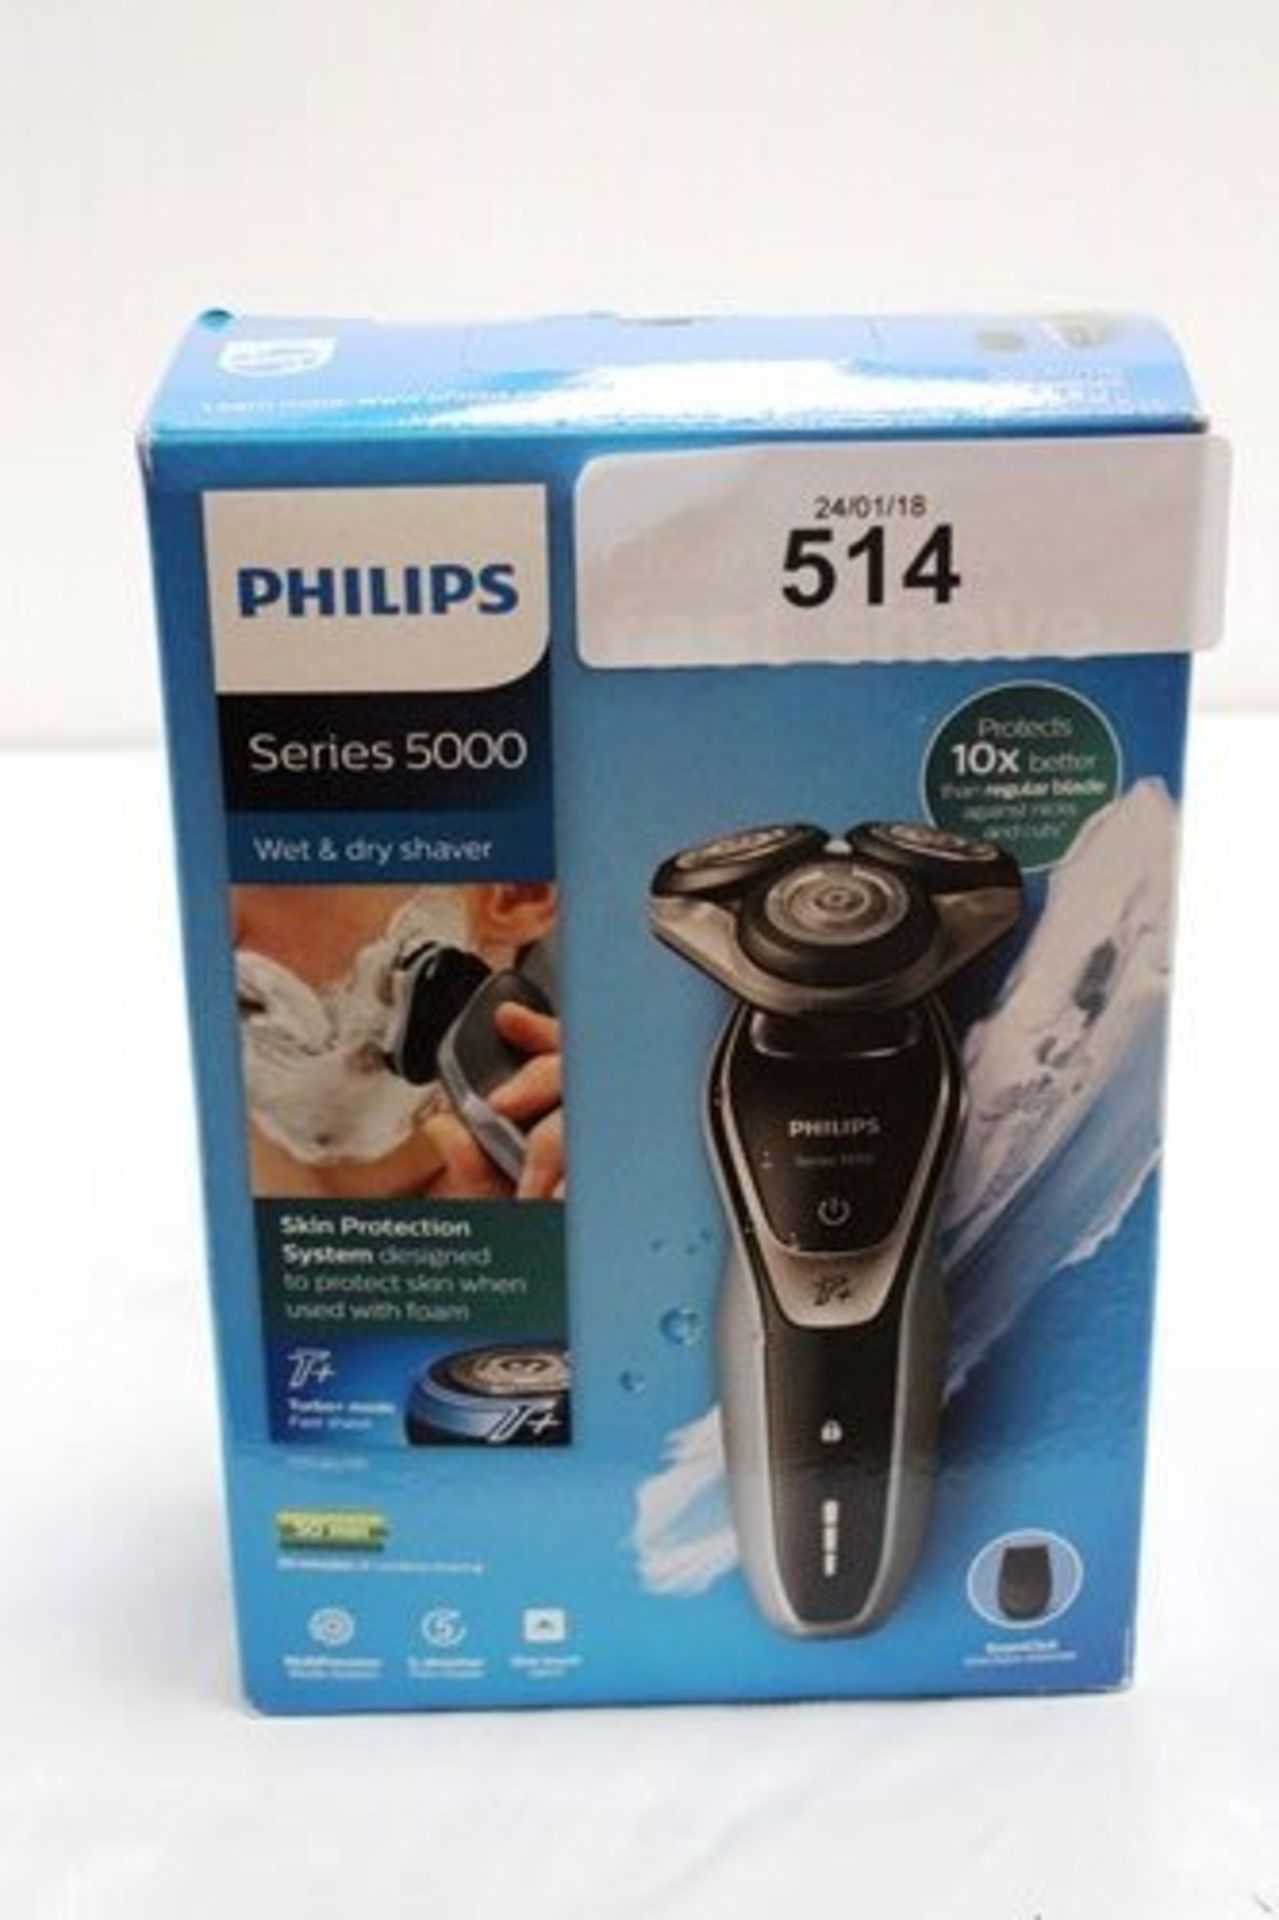 A Phillips series 5000 wet and dry shaver - New in box (C11)